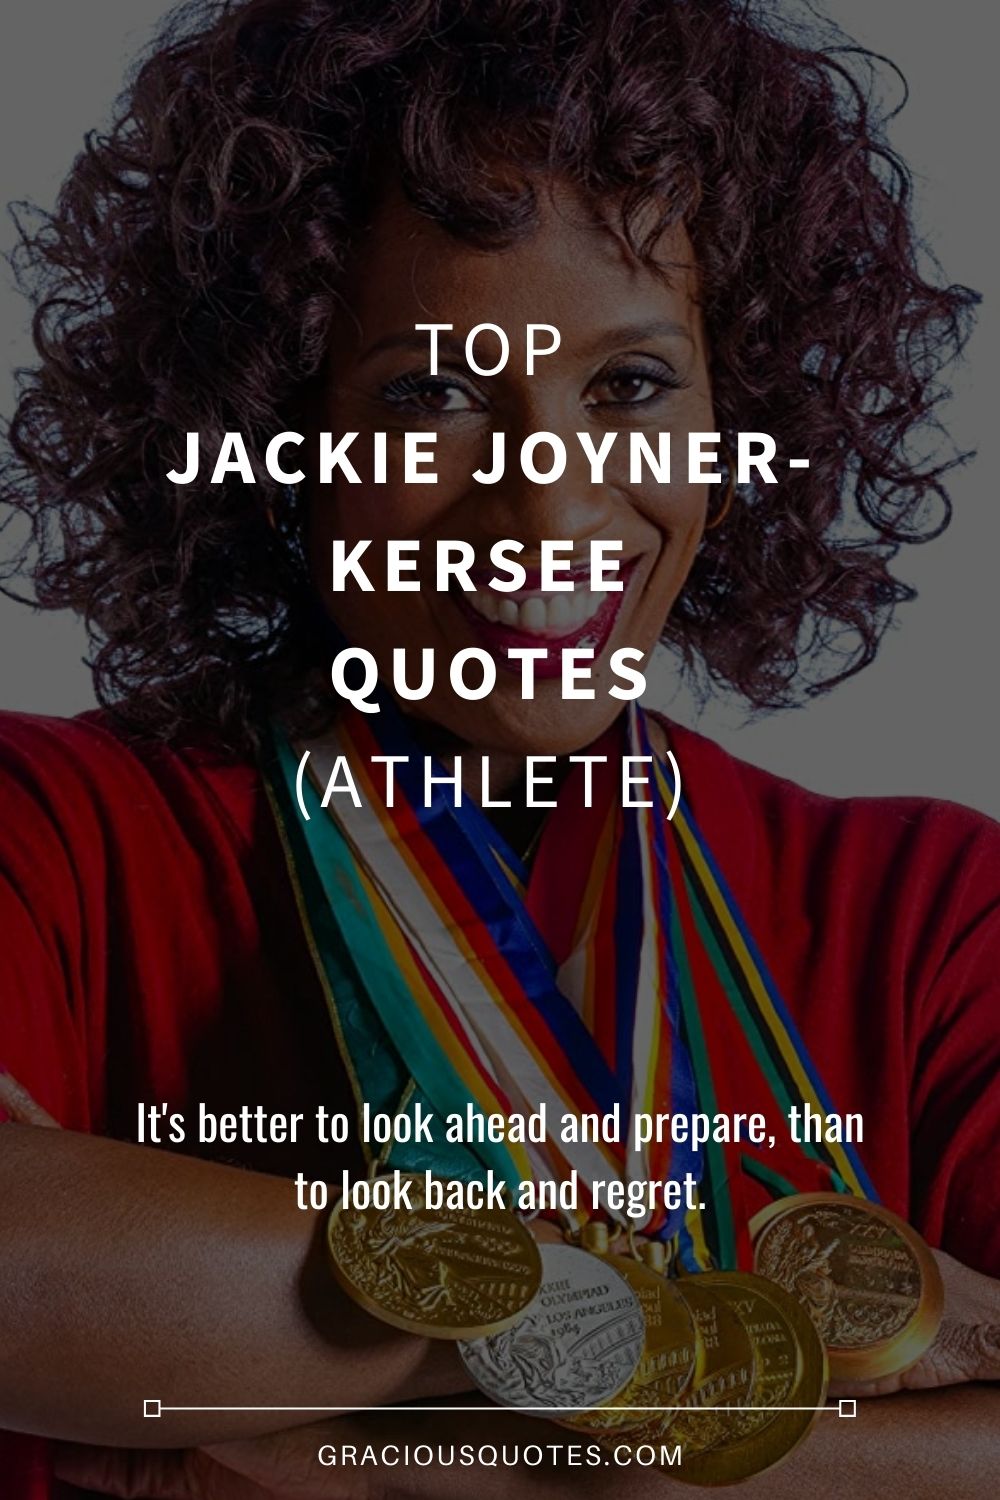 Top Jackie Joyner-Kersee Quotes (ATHLETE) - Gracious Quotes